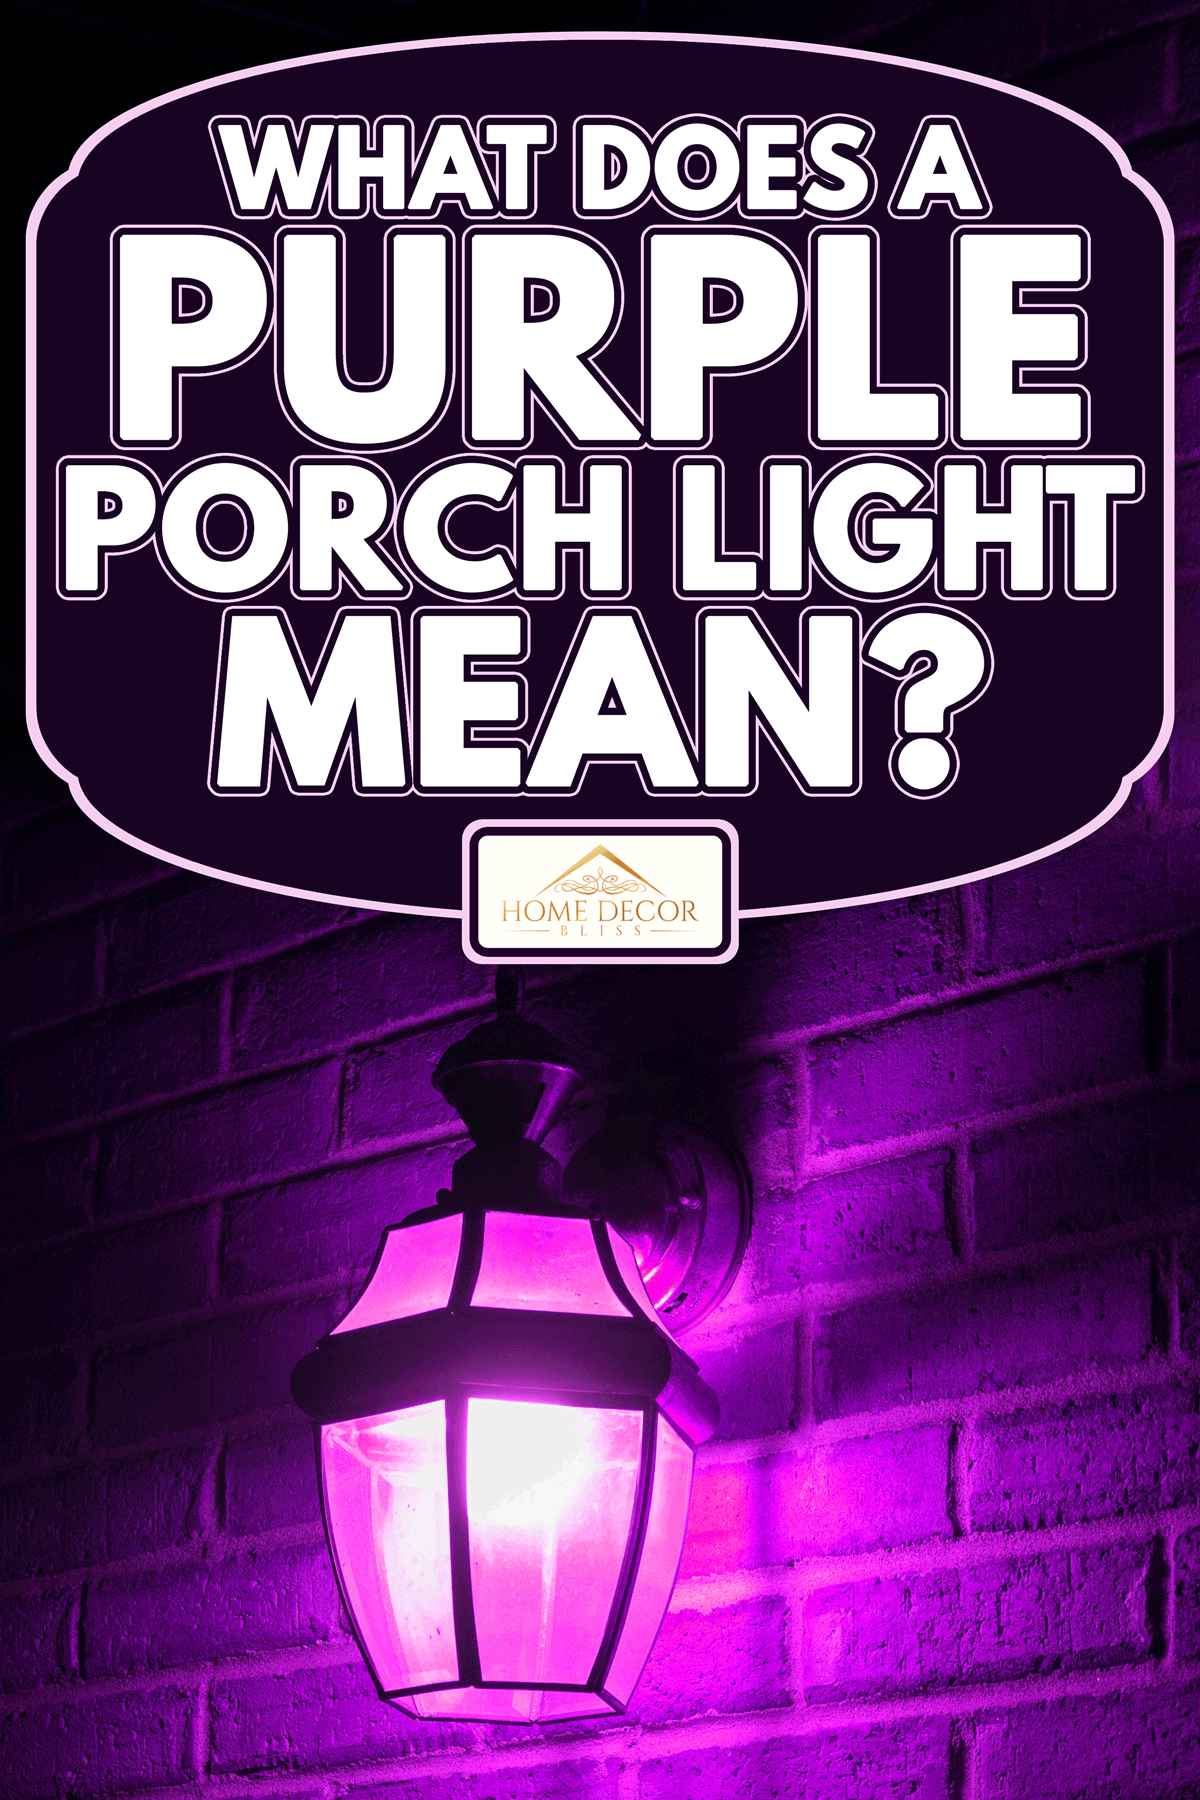 A purple light lantern illuminating the front porch at night, What Does a Purple Porch Light Mean?